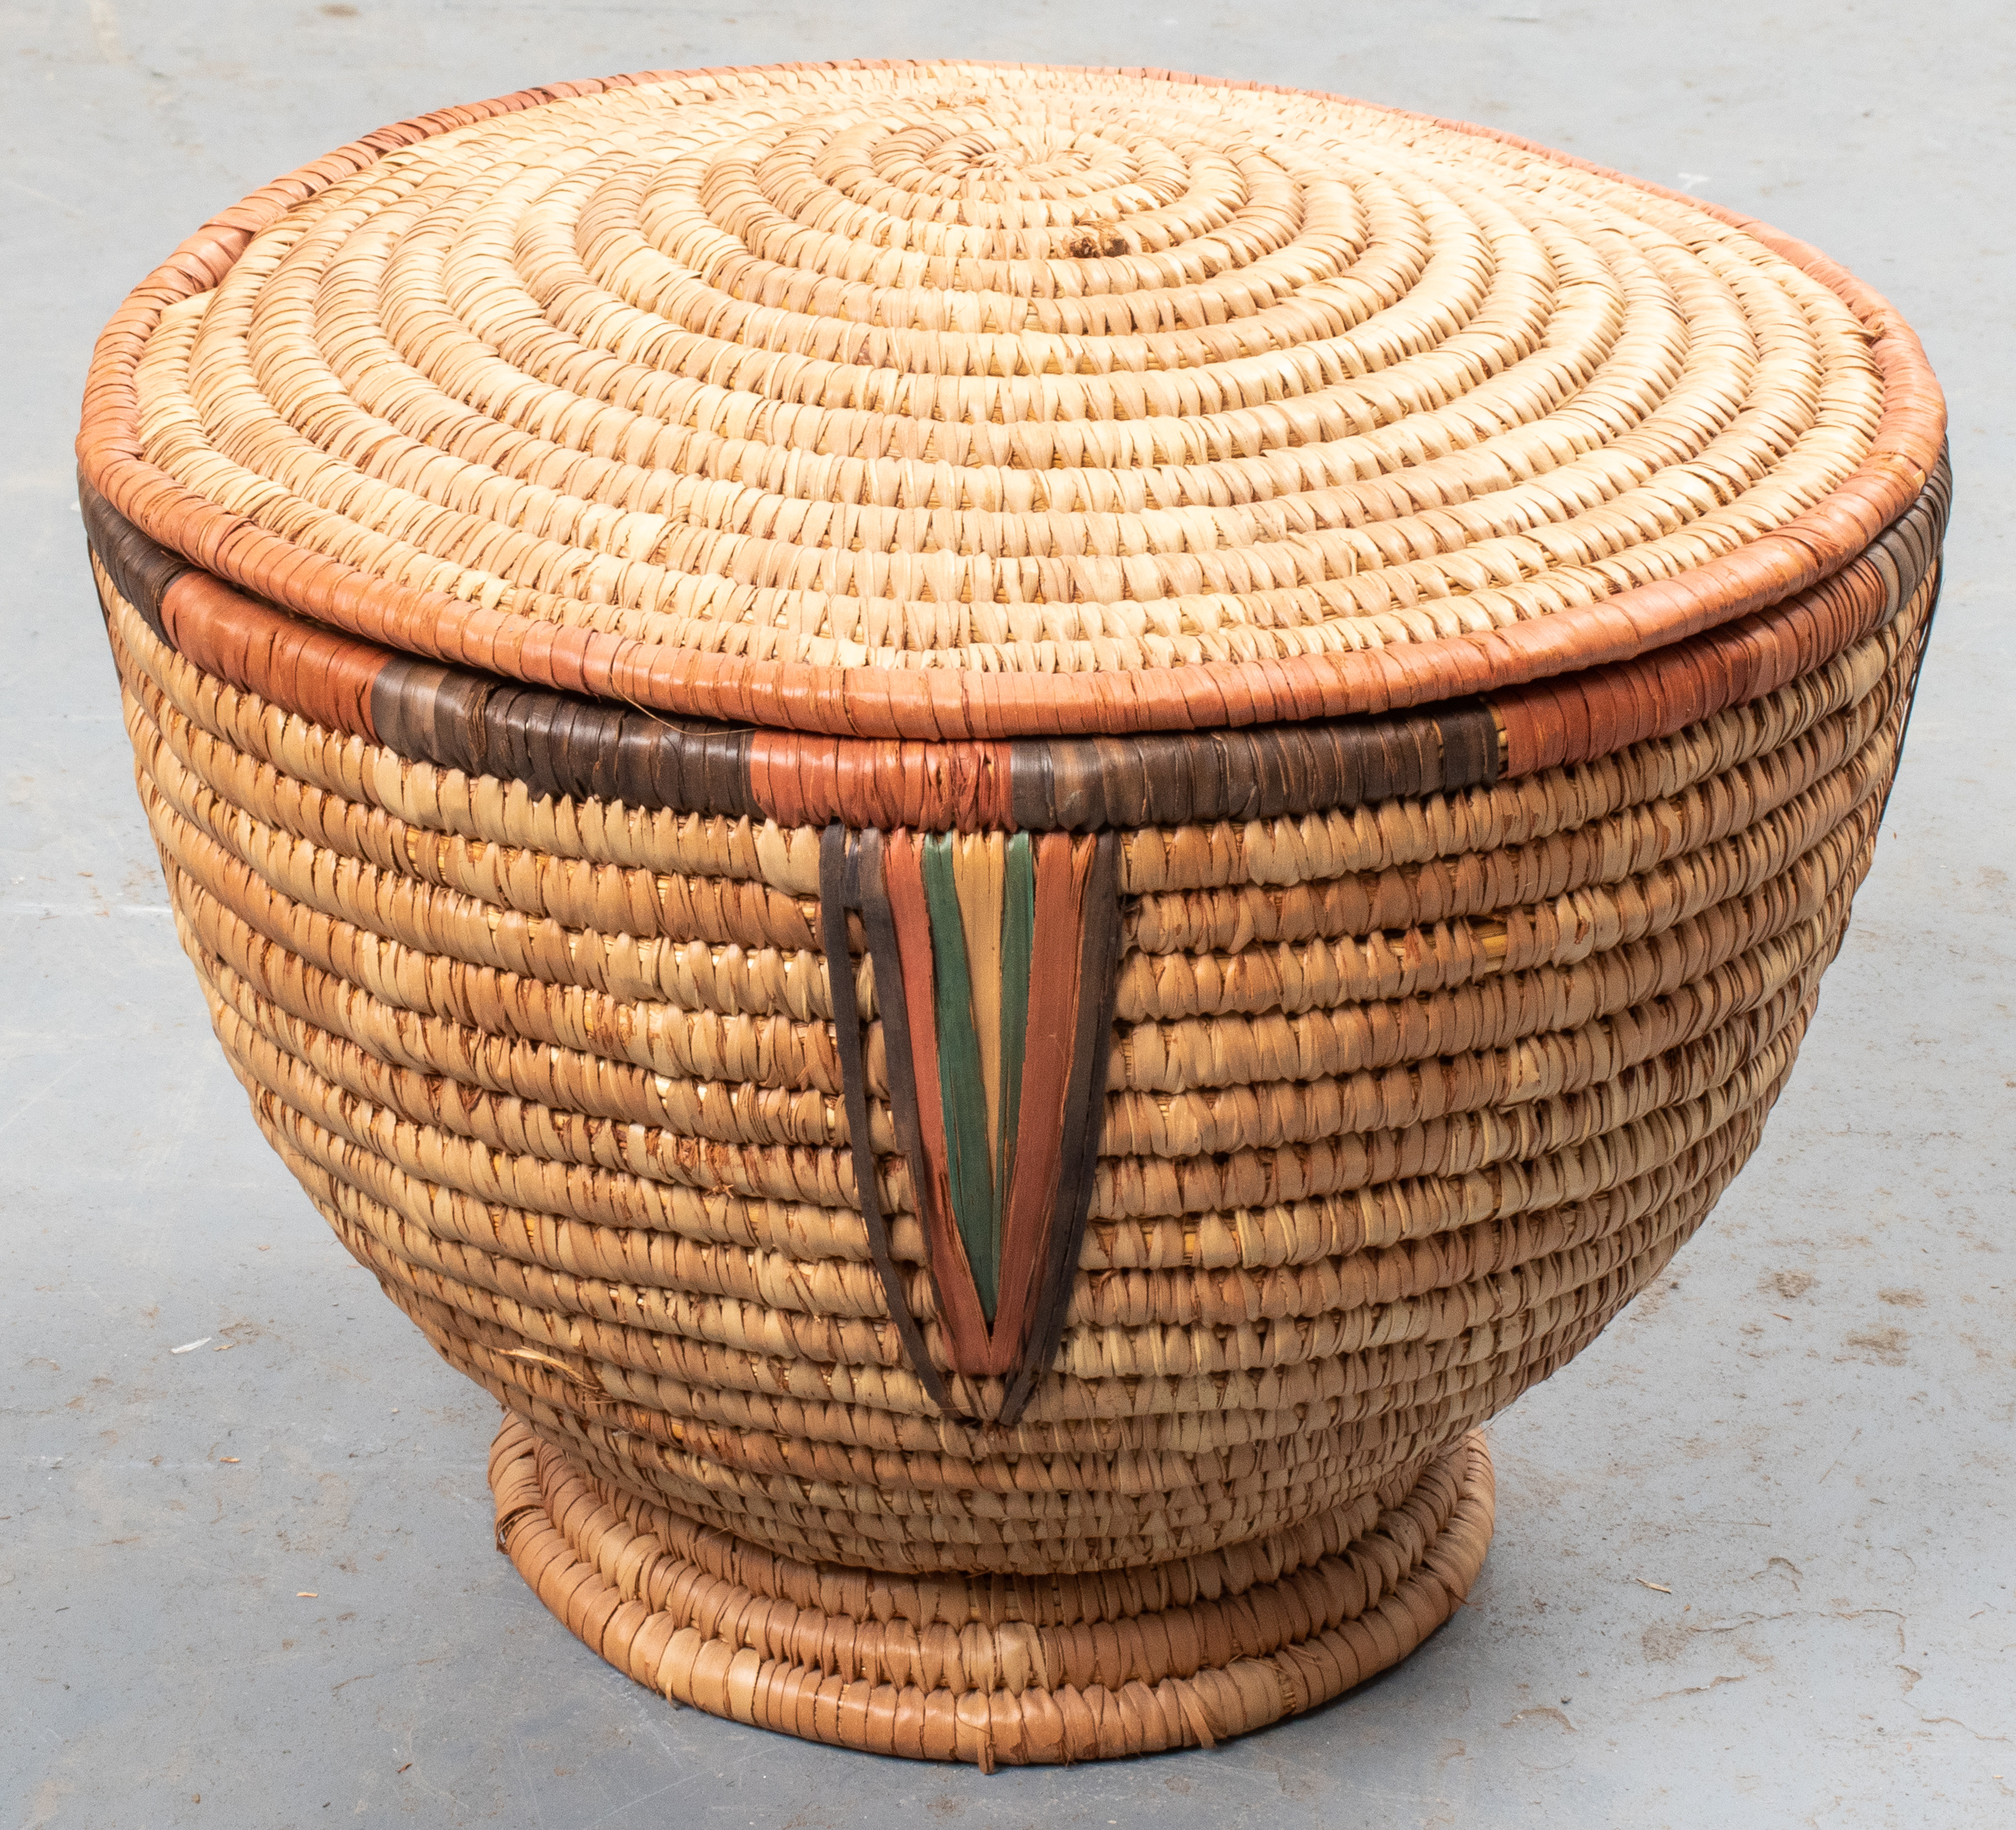 WOVEN STRAW BASKET WITH LID Woven